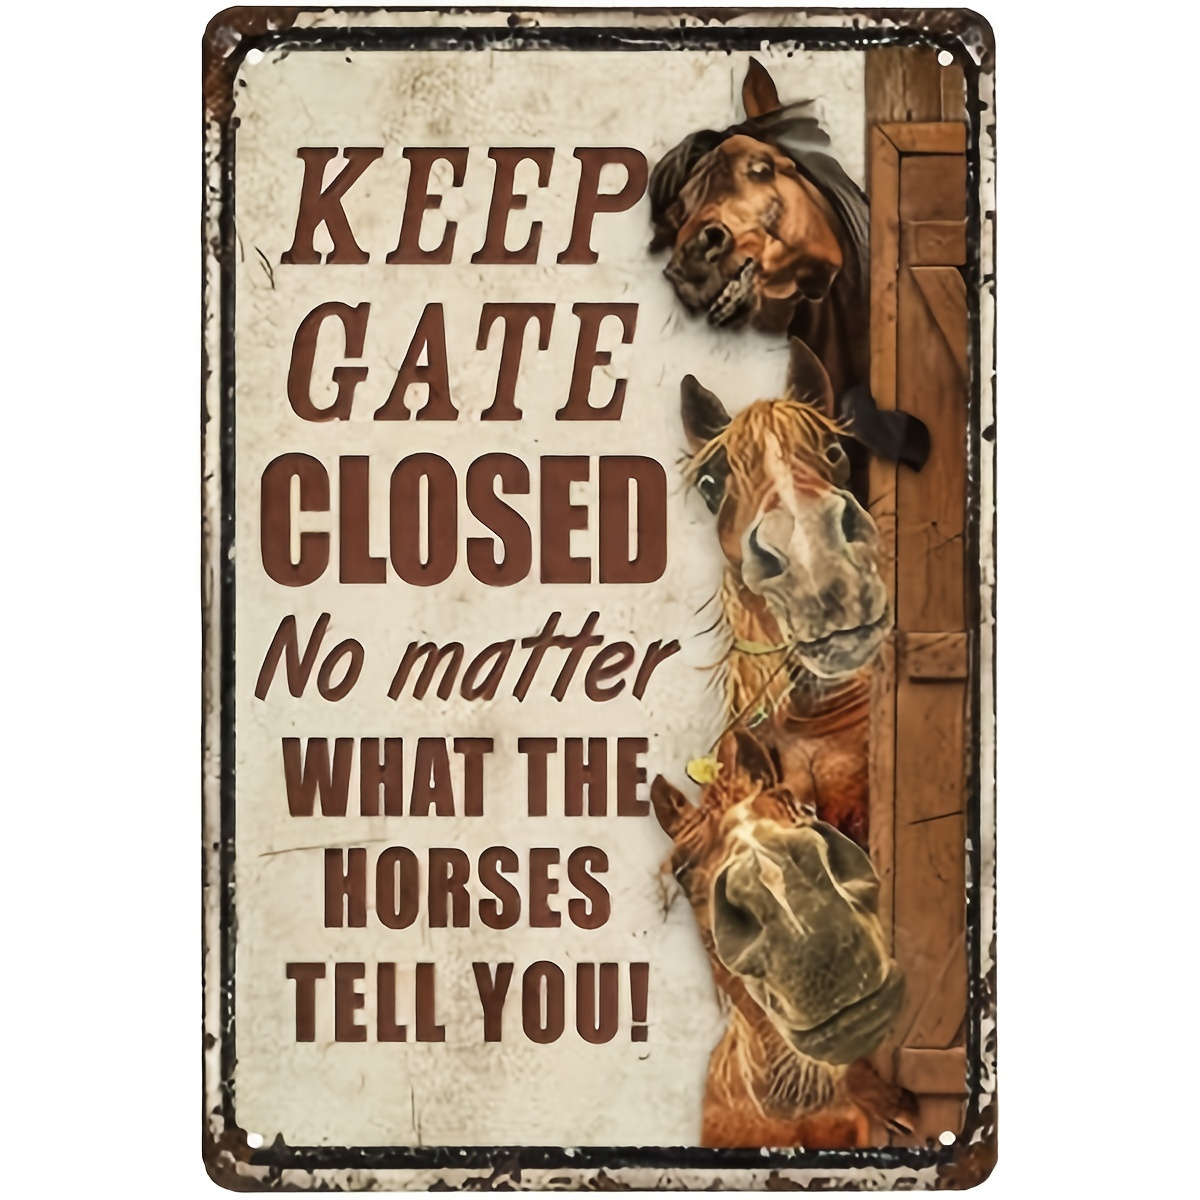 

1pc Horses Funny Keep Gate Closed No Matter What The Horses Tell You Metal Sign Tin Sign Funny Novetly Caution Sign Metal For Farmhouse Fence House Wall Gate 12x8 Inch